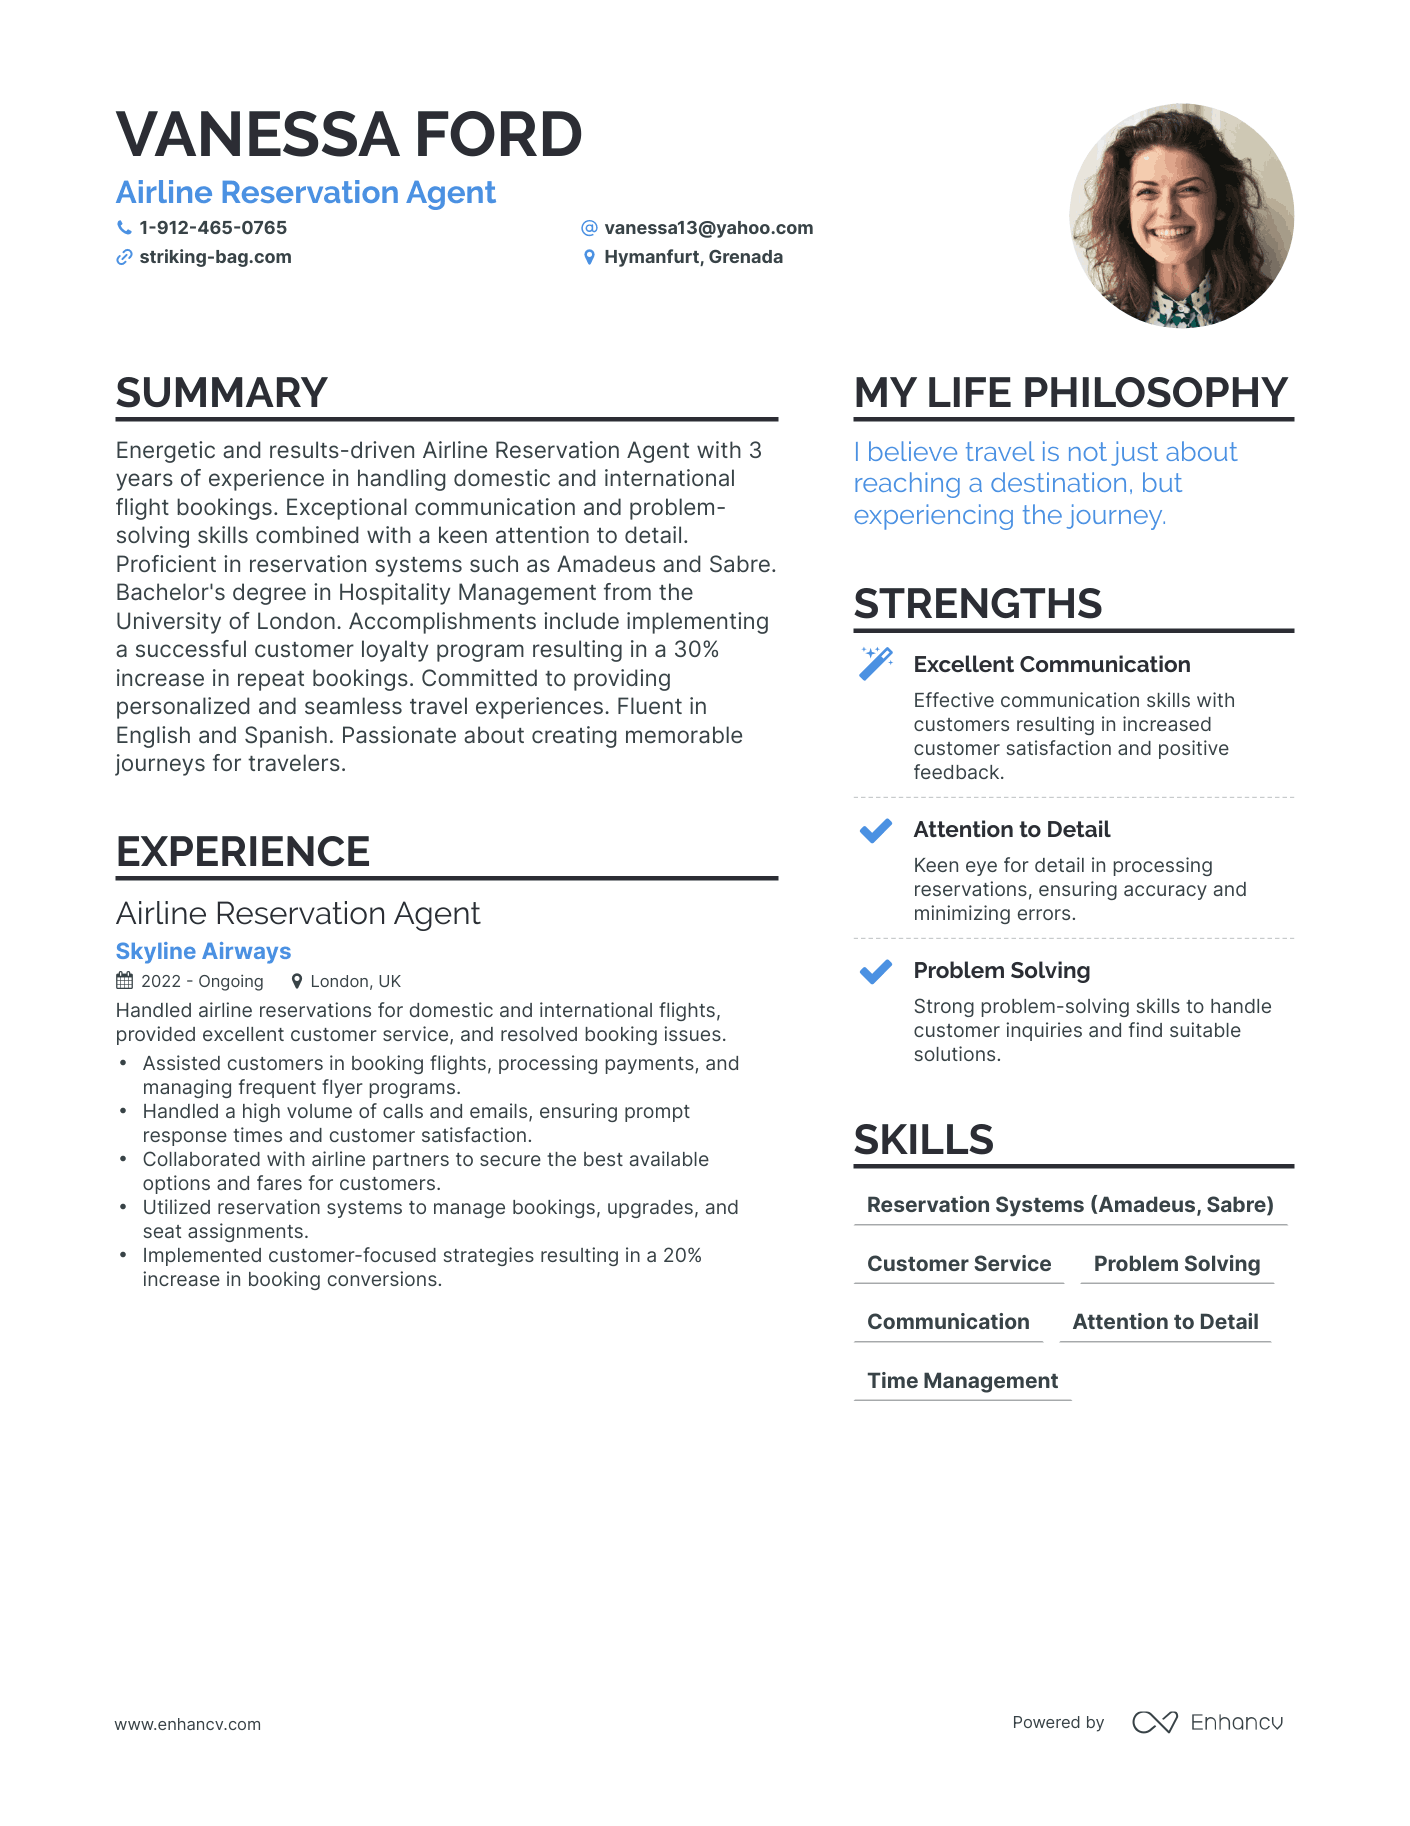 Airline Reservation Agent resume example